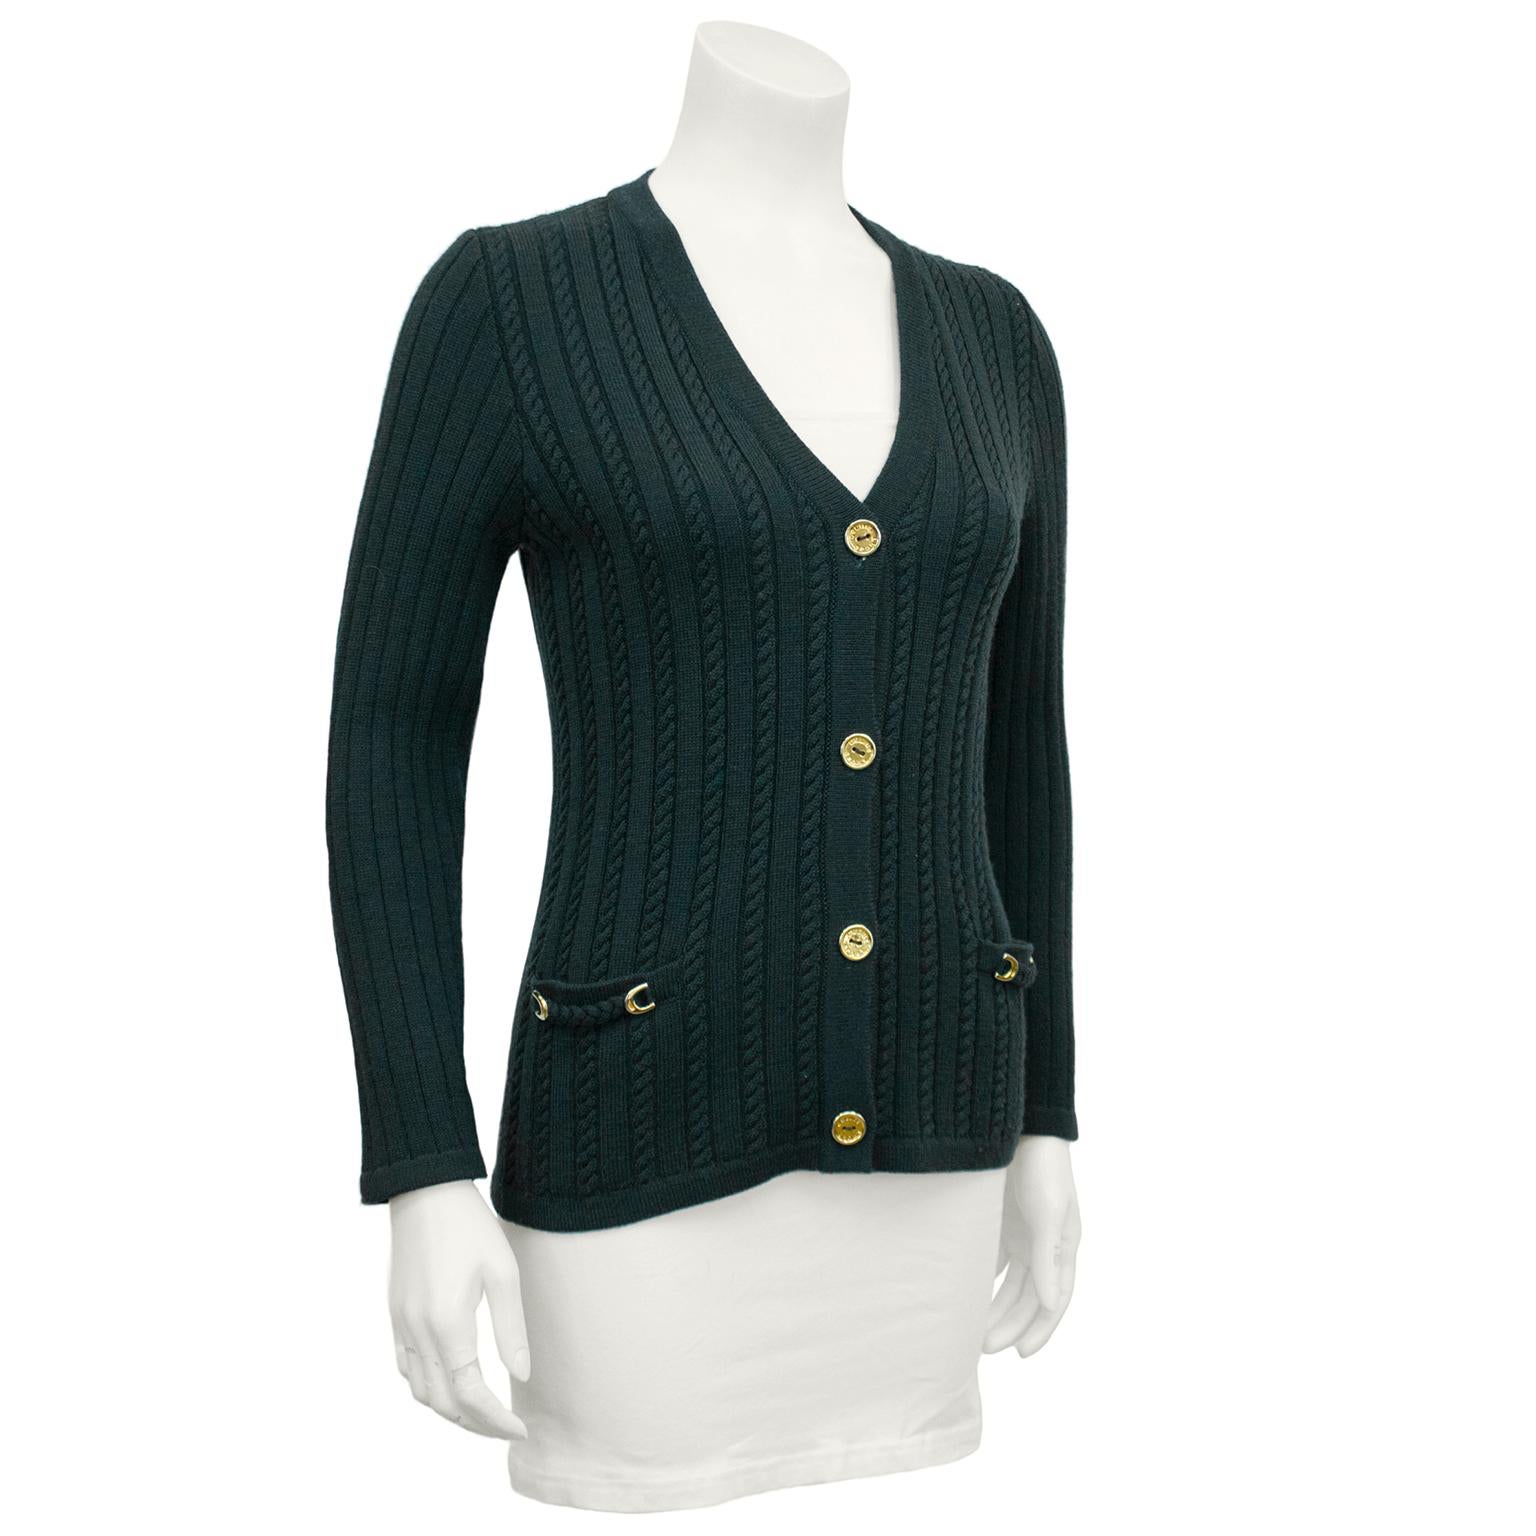 Hunter Green wool cable knit cardigan with gold Celine logo gold buttons and gold chain details at flat pockets. In excellent vintage condition, marked FR 38. Fits like a US 2-4.